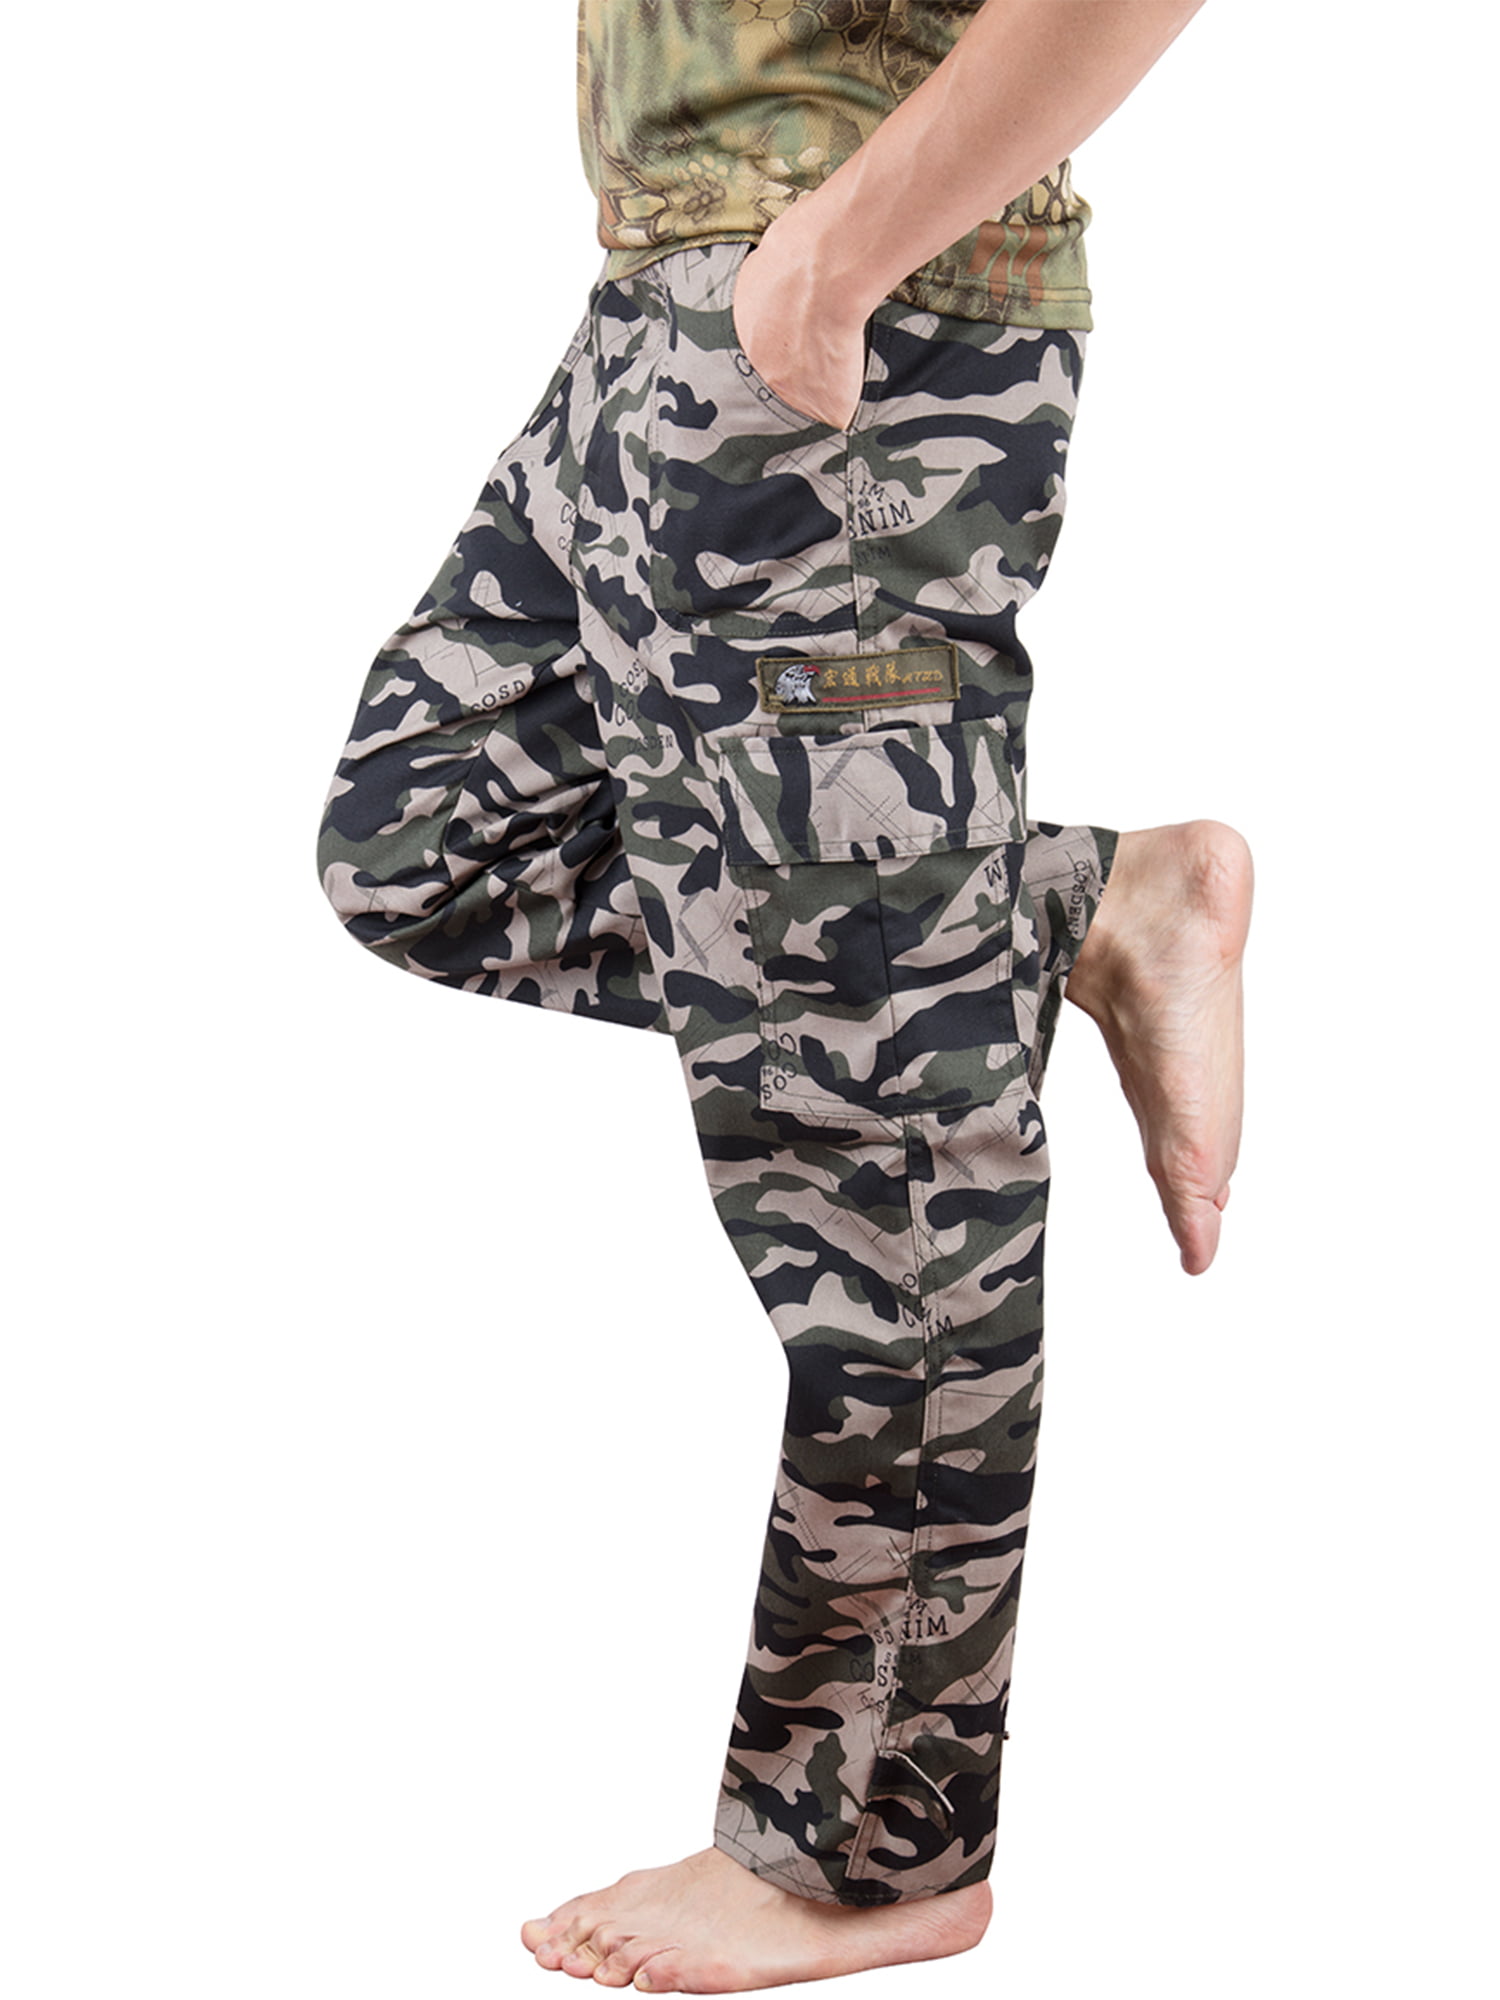 stylish pants for girls- Army print trouser for girls